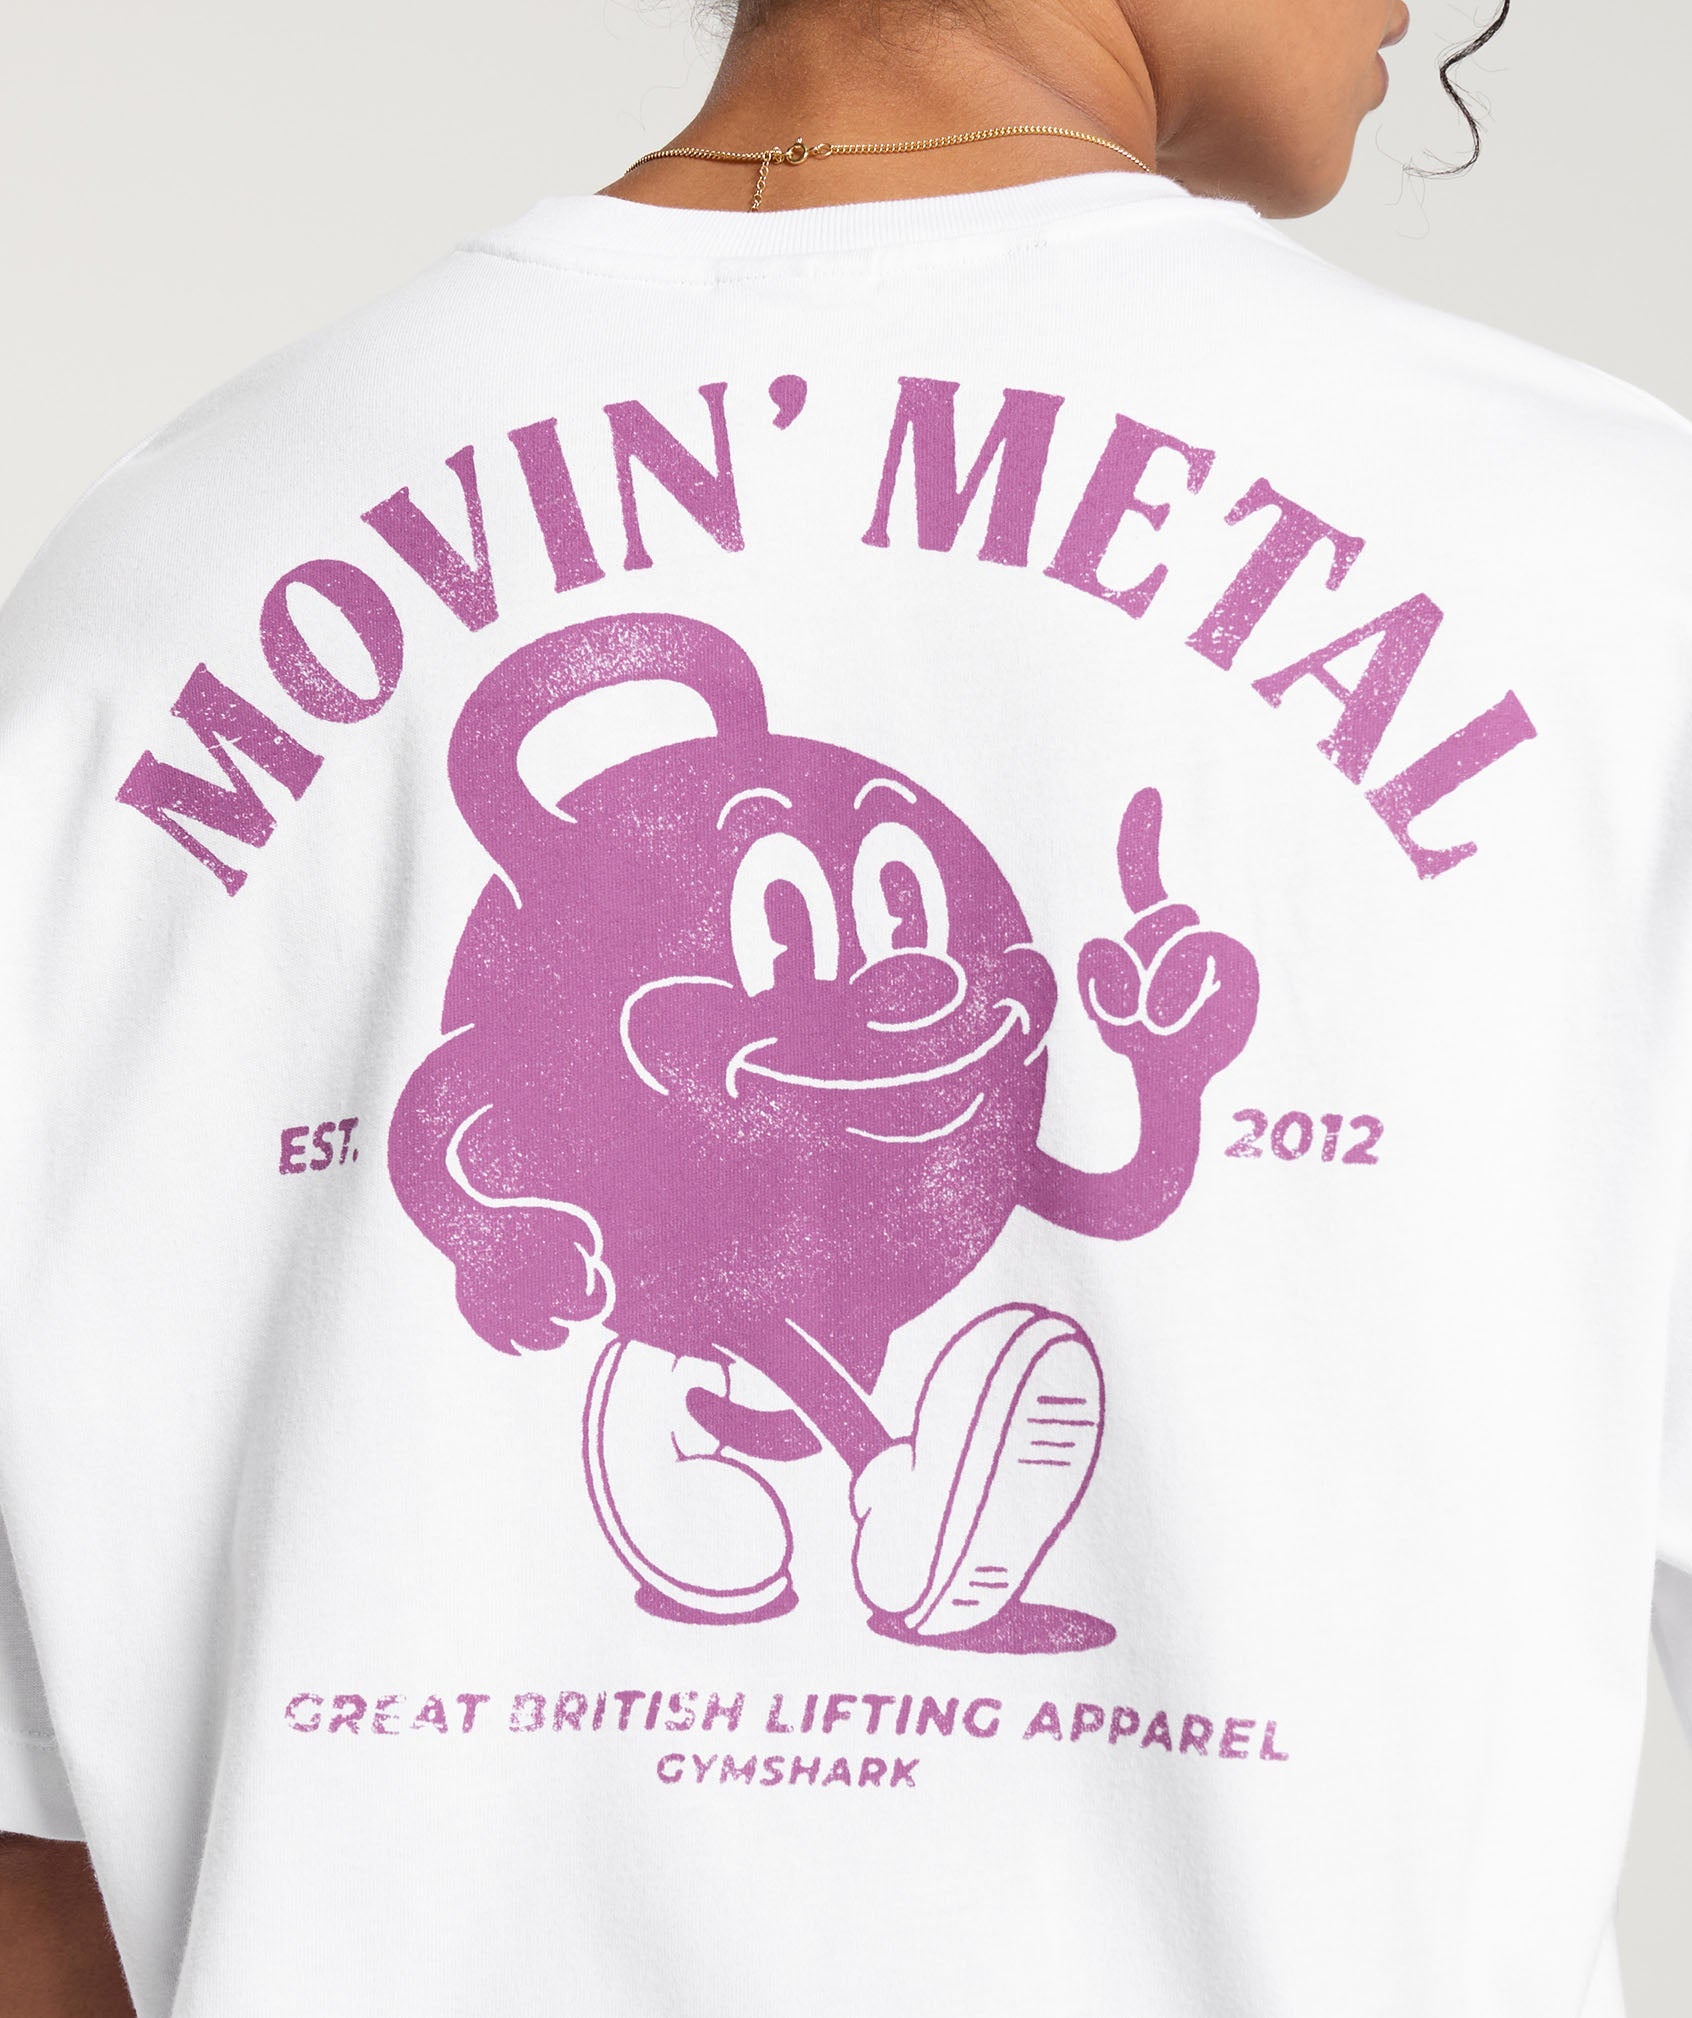 Movin' Metal T-Shirt in White - view 5